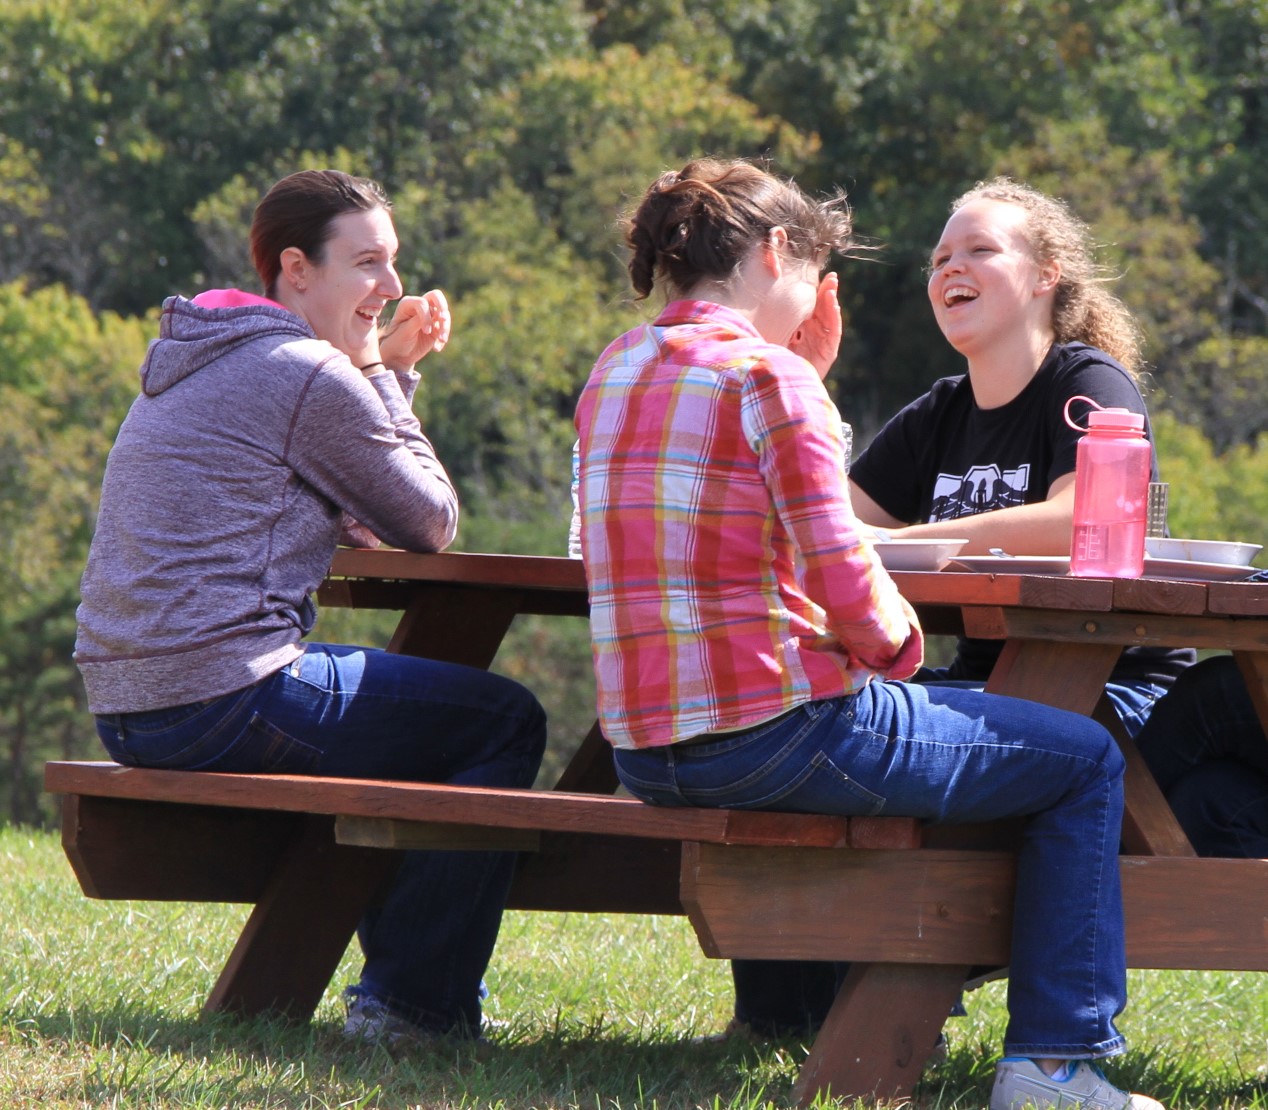 Three students sit at a picnic table outside and laugh